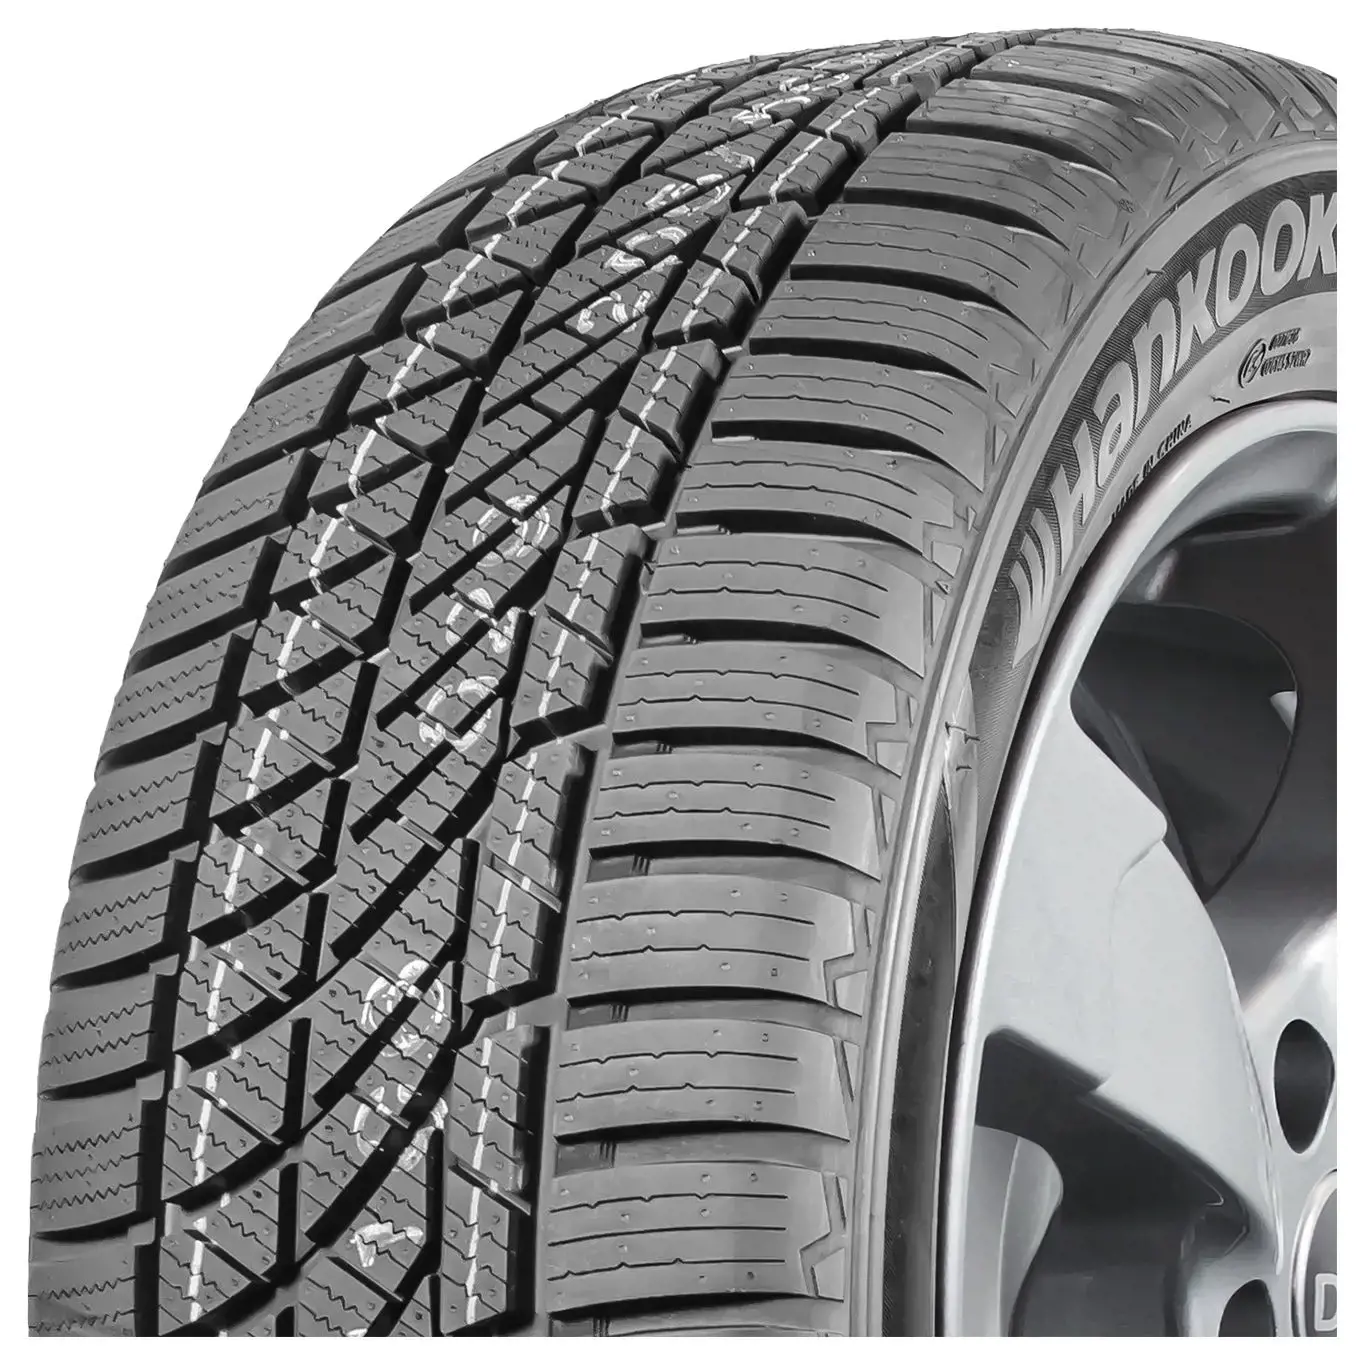 145/80 R13 75T Kinergy 4S H740 SP M+S